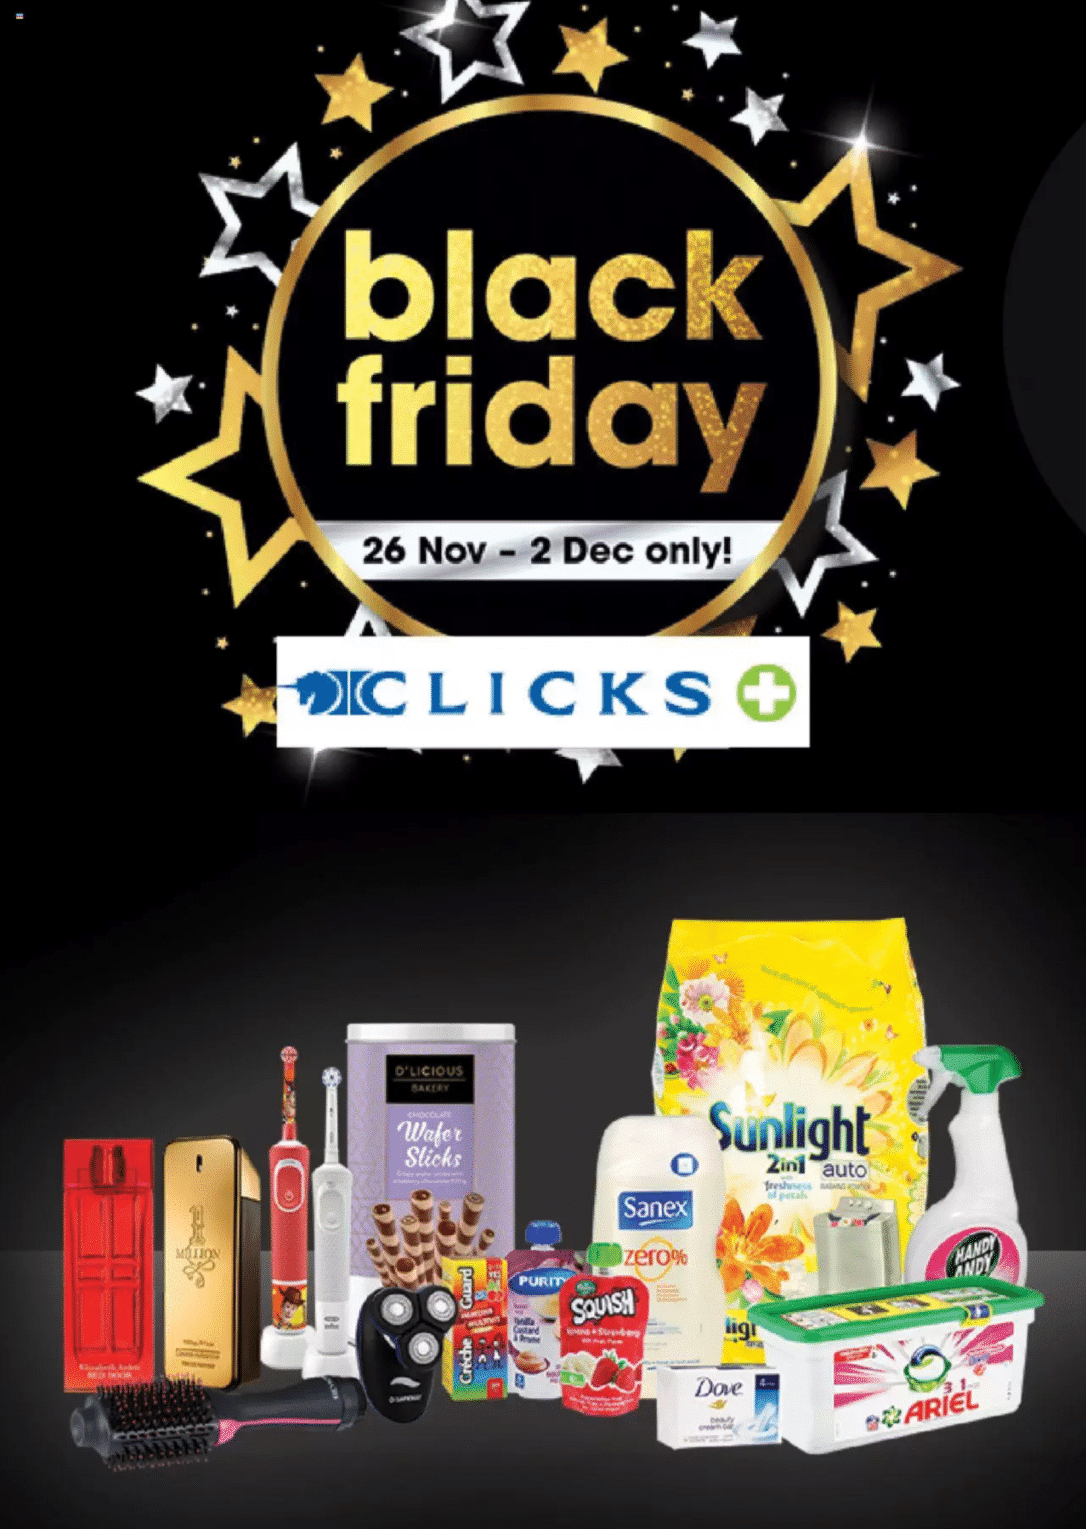 Clicks Black Friday Specials & Deals 2020 - What Is Great Clips Black Friday Deal